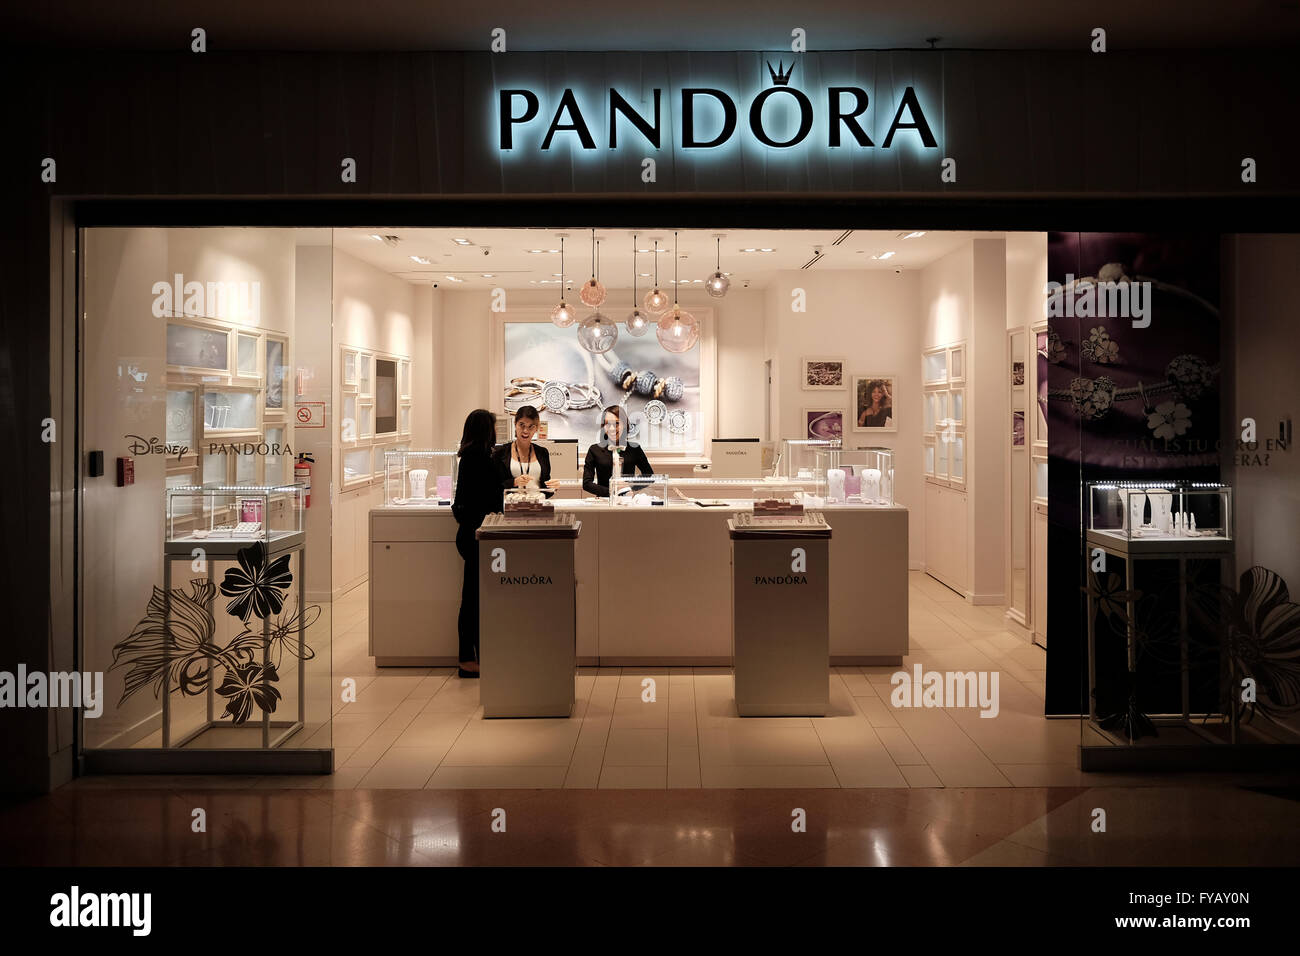 A Pandora jewellery store in Tocumen International Airport in Panama city Panama. Pandora is a Danish jewellery manufacturer which markets its products in more than 100 countries on six continents with more than 6,700 points of sale. Stock Photo